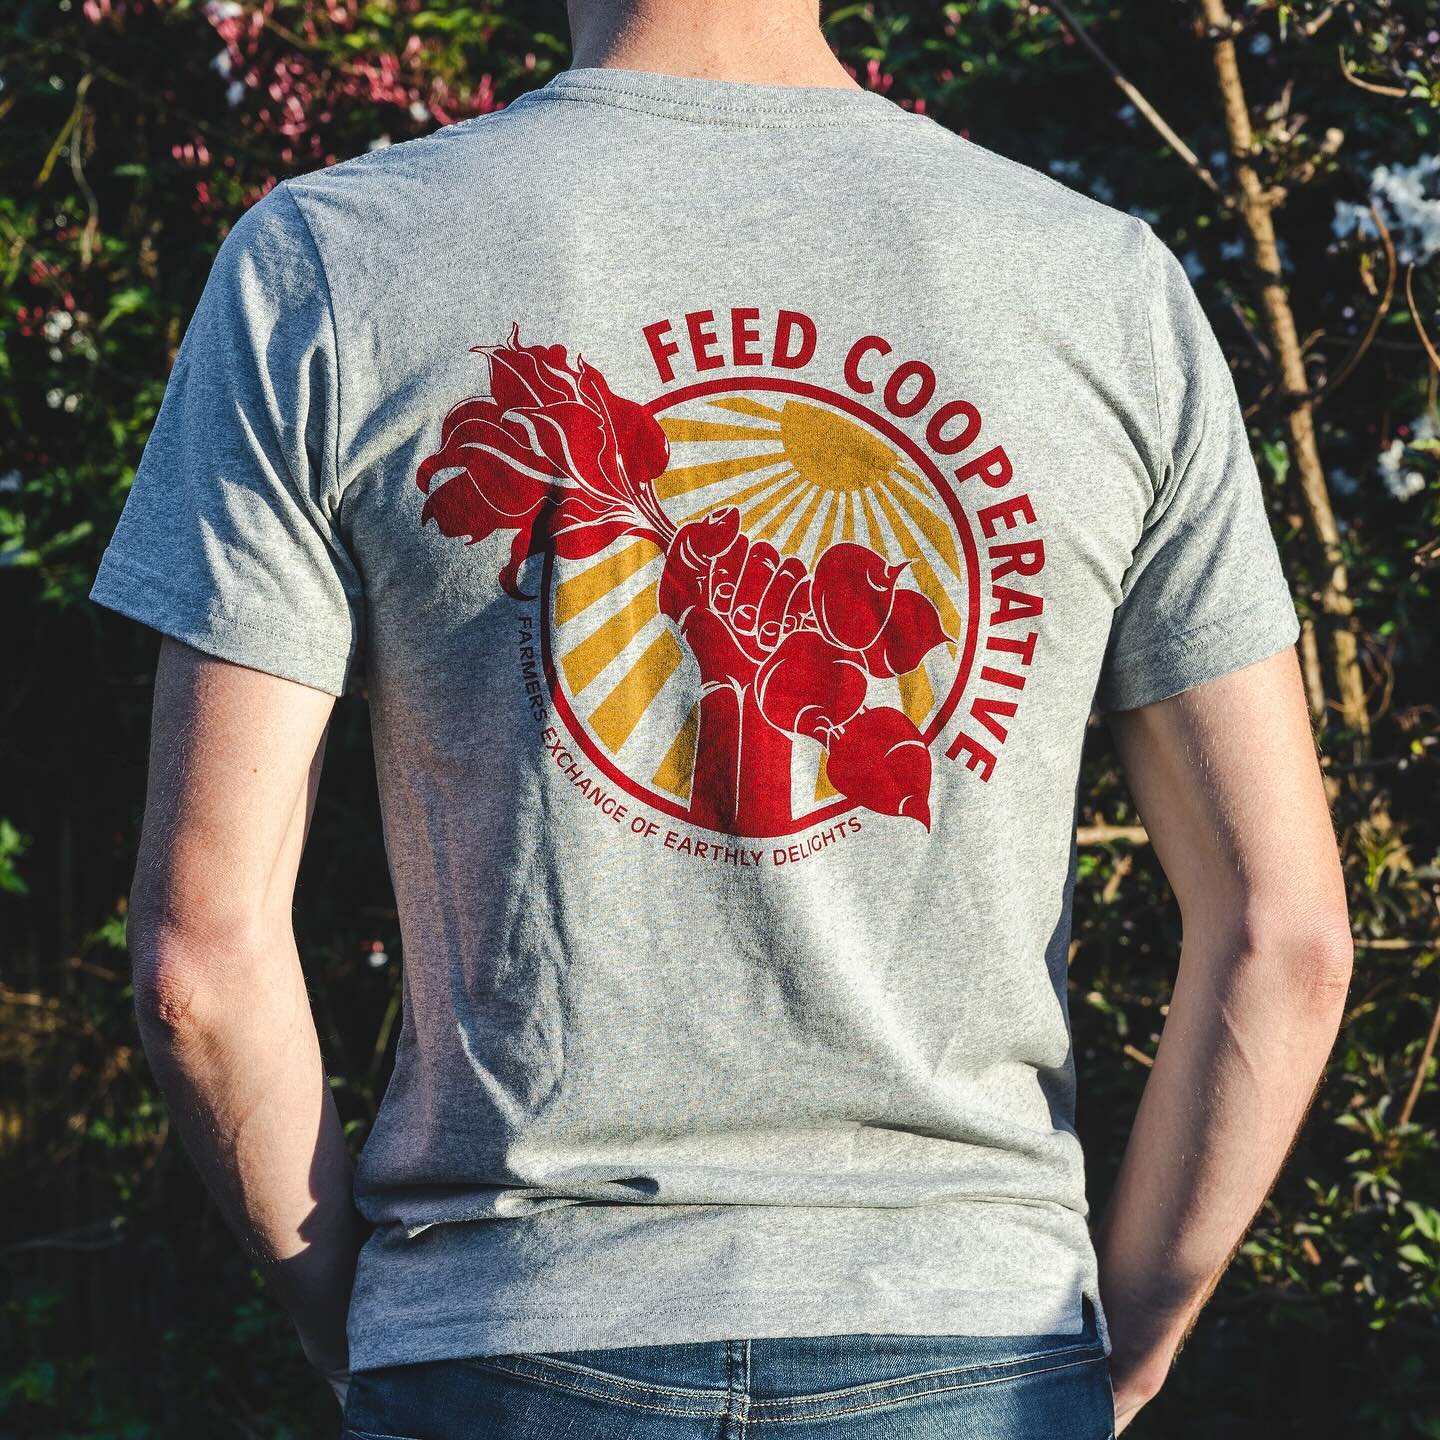 🔥New merch just dropped in the storefront!! We&rsquo;ve got new t-shirts &amp; zip up hoodies, plus hats in a variety of colors to choose from. Treat yourself to something new, while also supporting your local farms and sharing your love for FEED ar